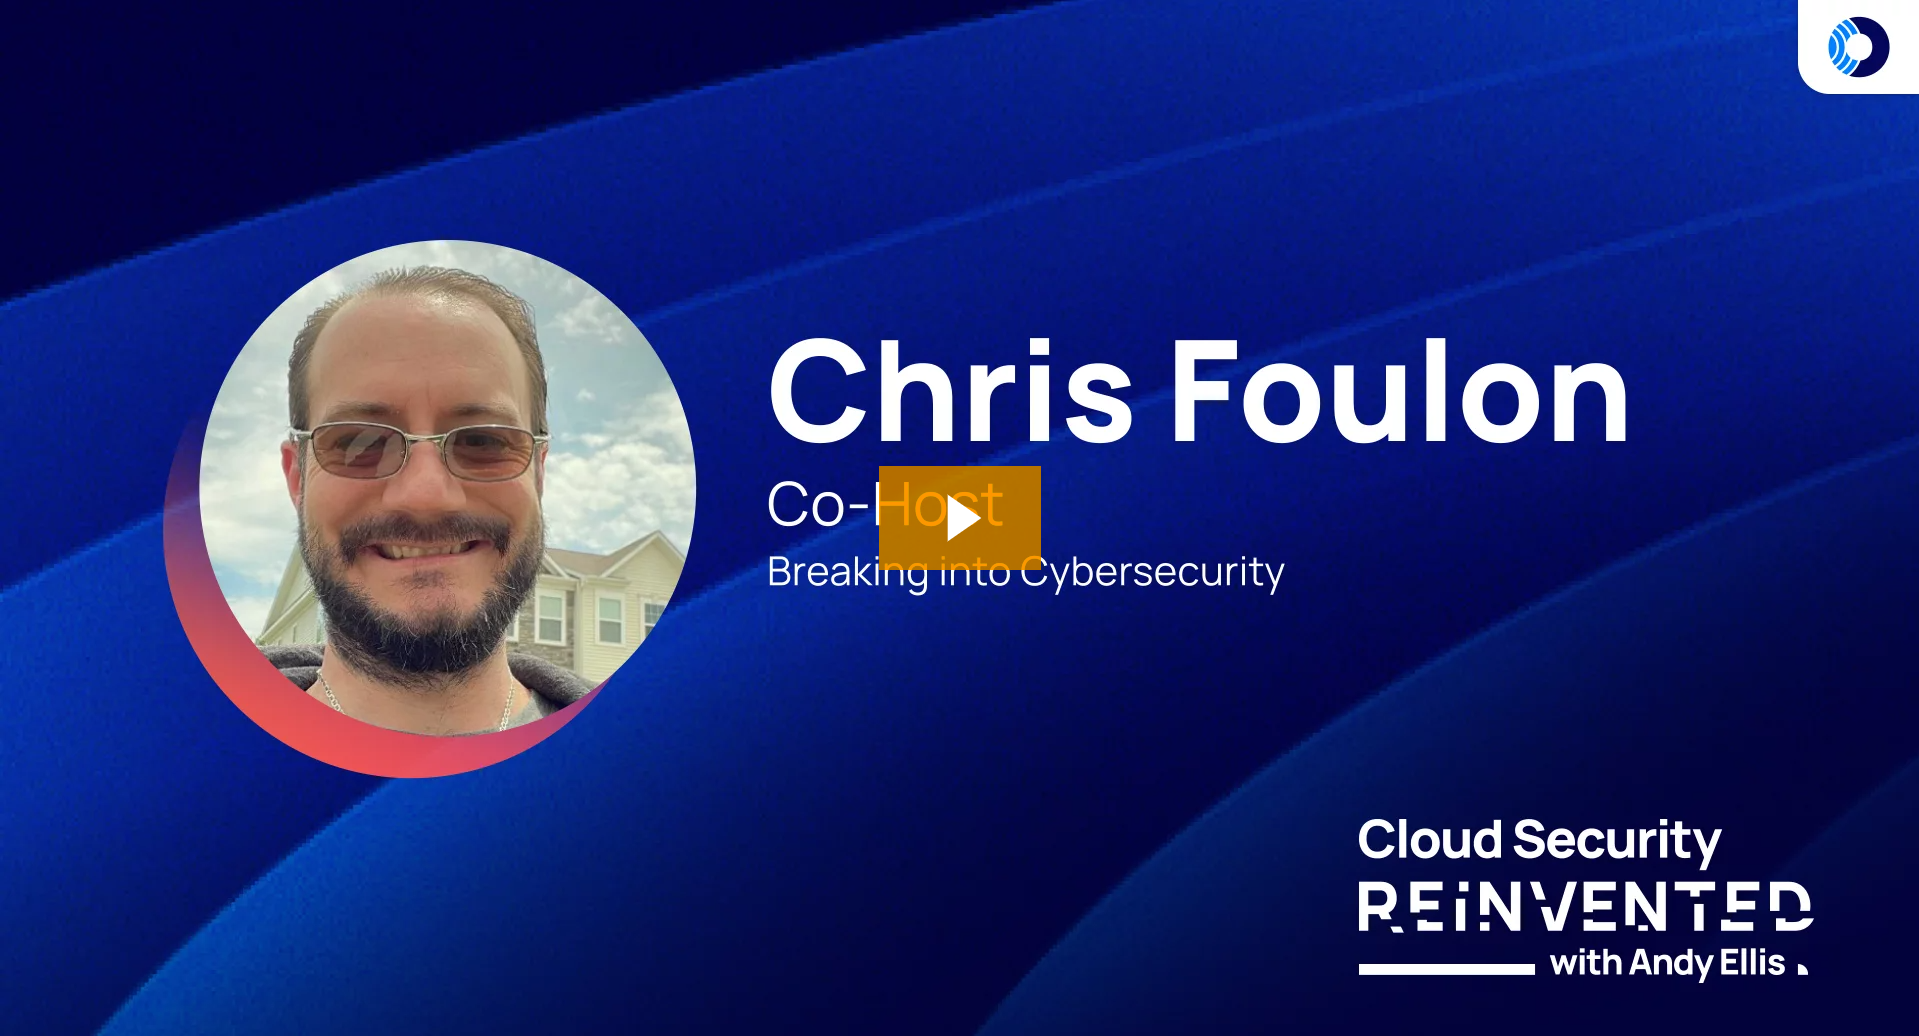 Cloud Security Reinvented: Chris Foulon